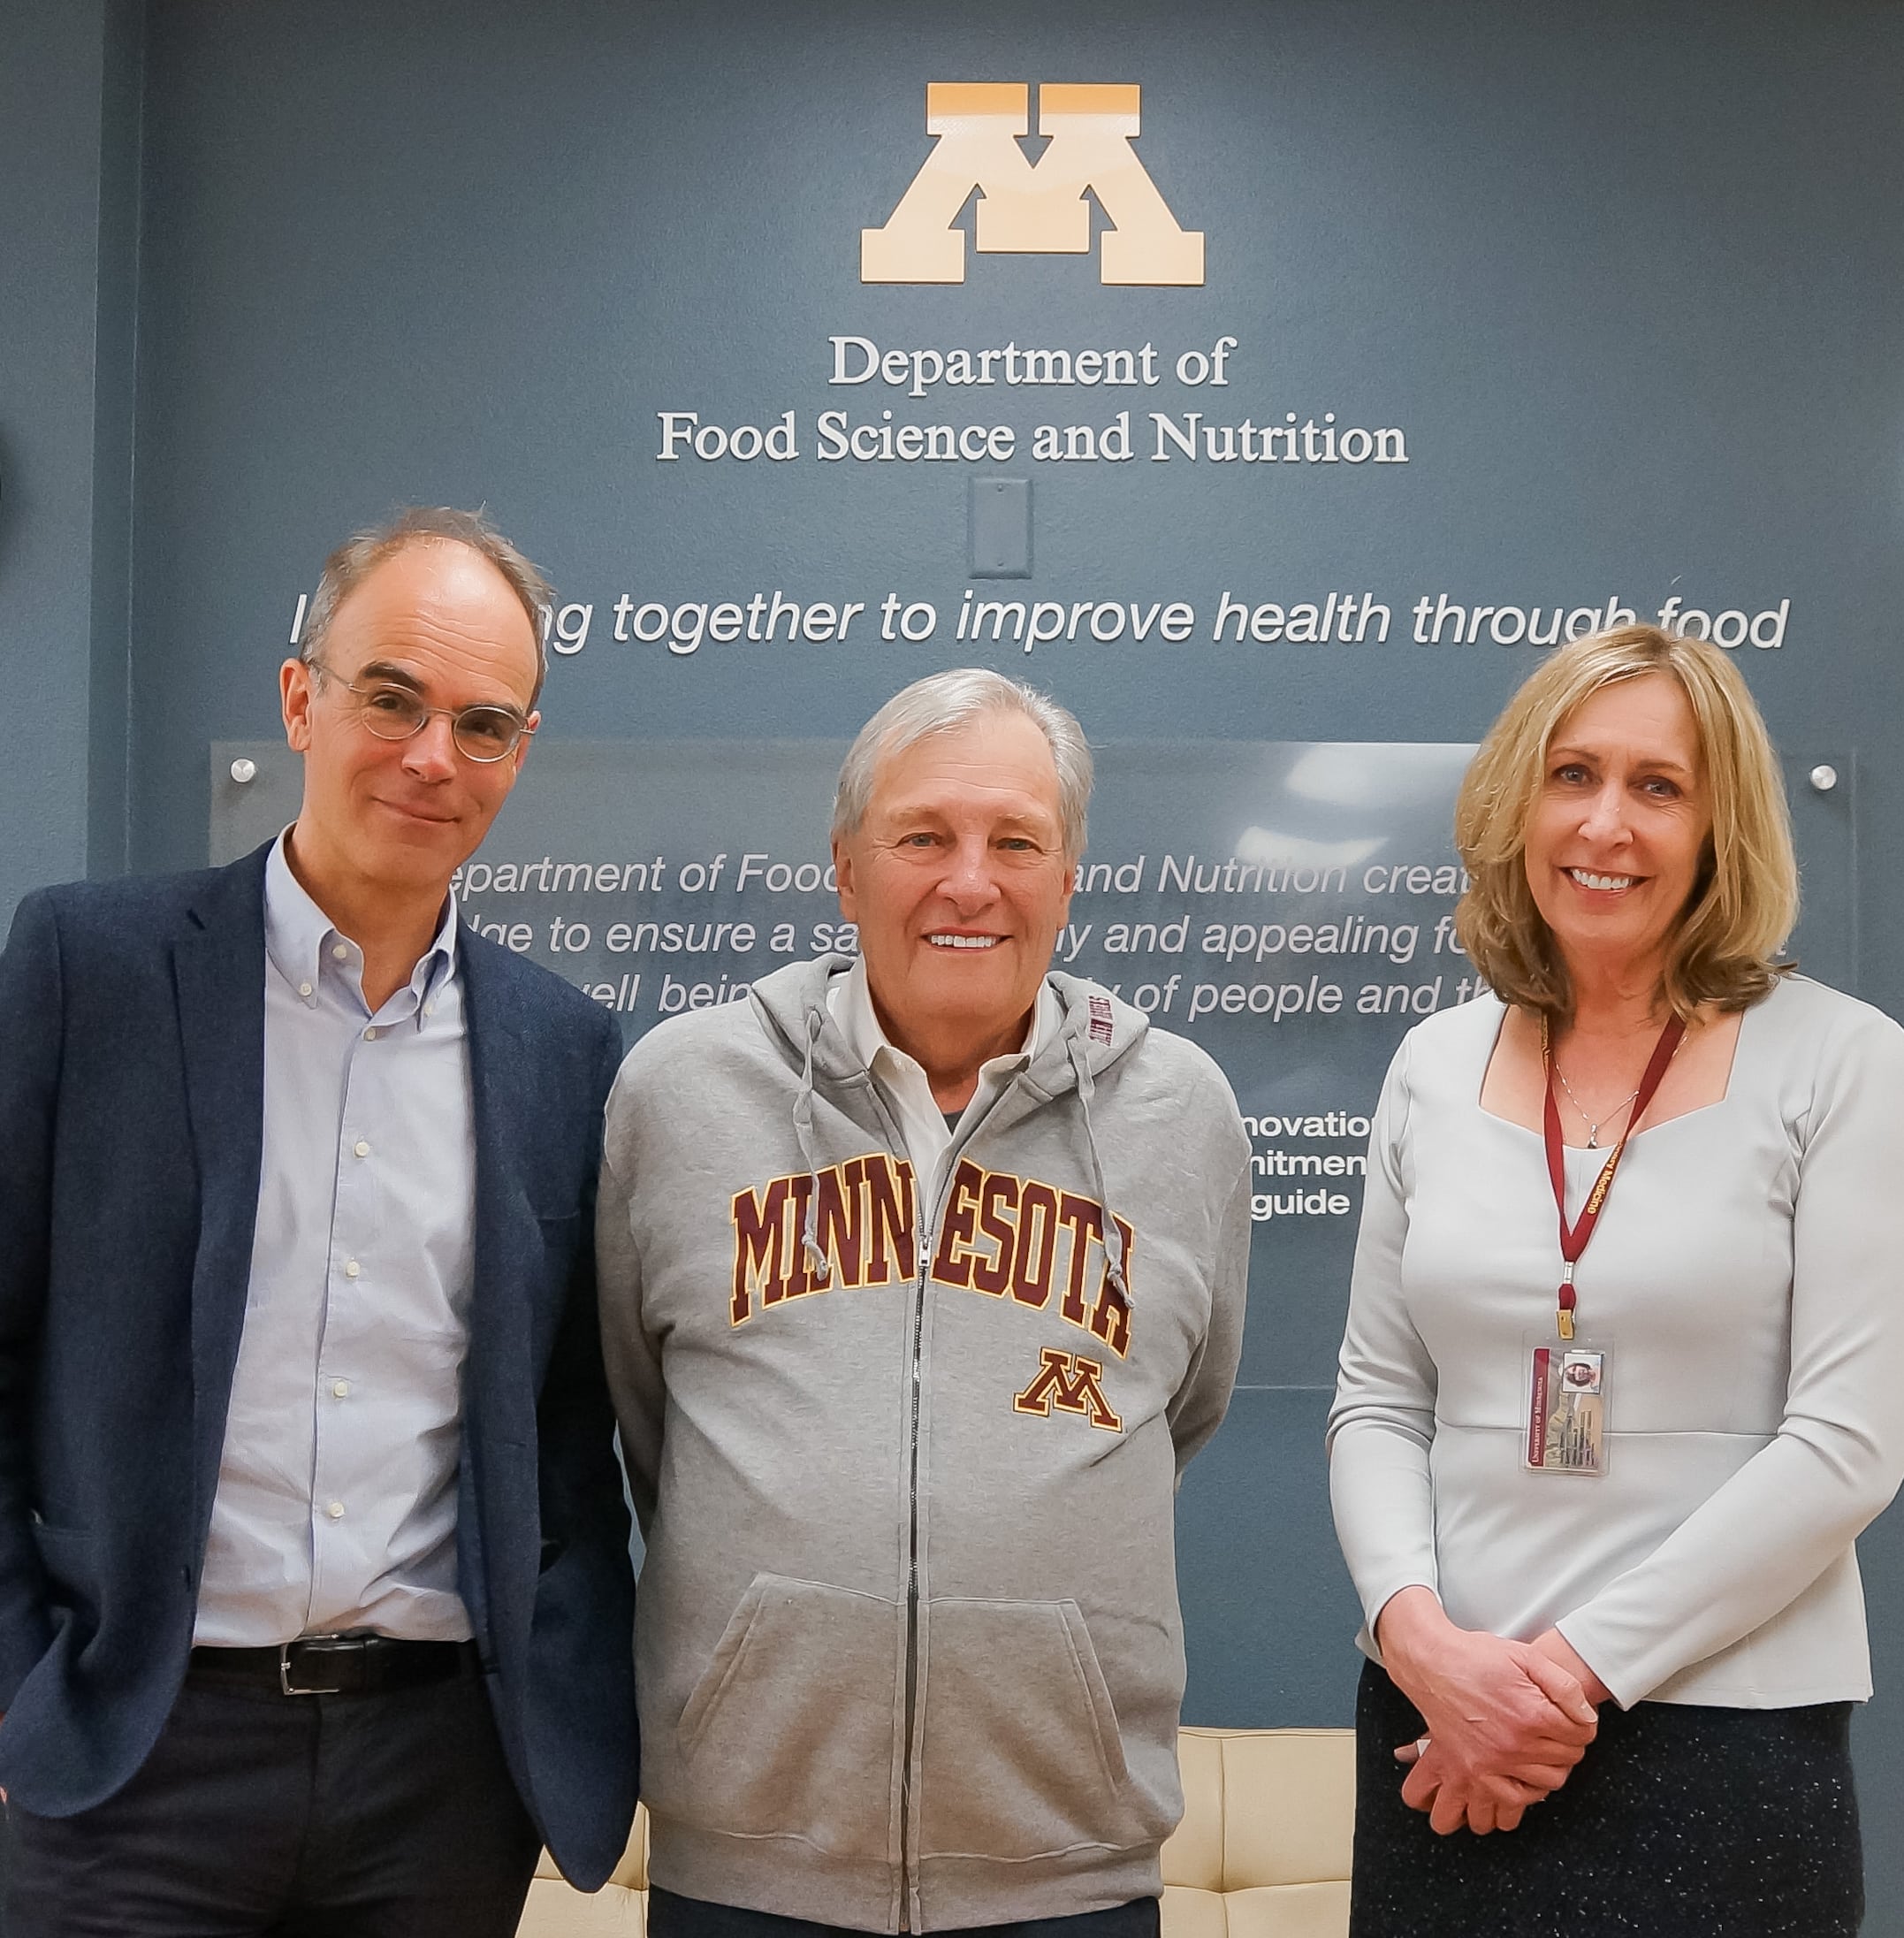 Food Safety and Food Quality Award at University of Minnesota